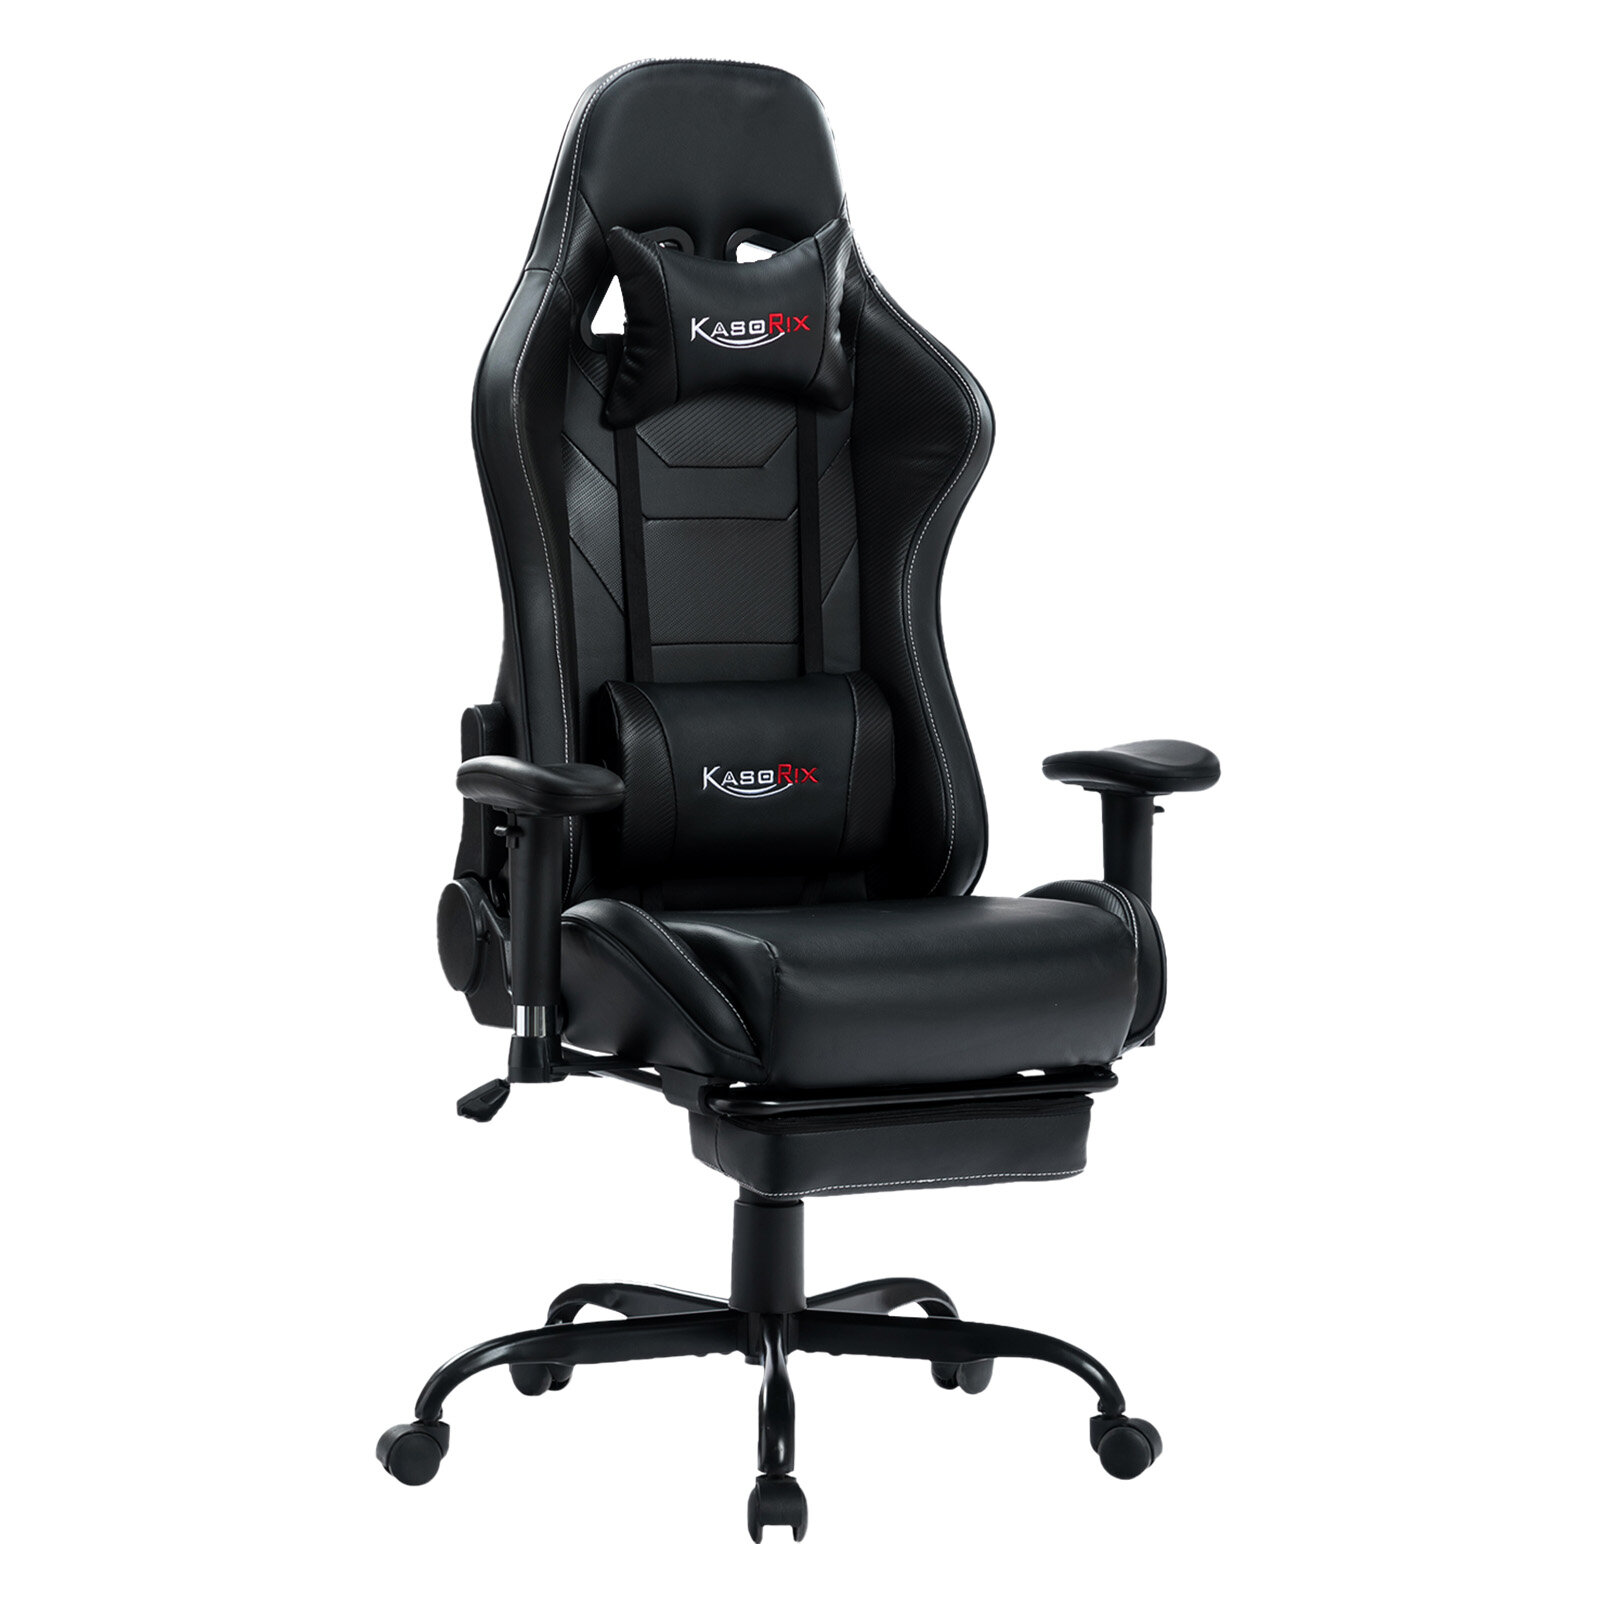 Black KCREAM Gaming Chair High-Back PU Leather Computer Chair Adjustable Height Professional Racing Style Office Chair with Footrest and Headrest and Lumbar Pillows 